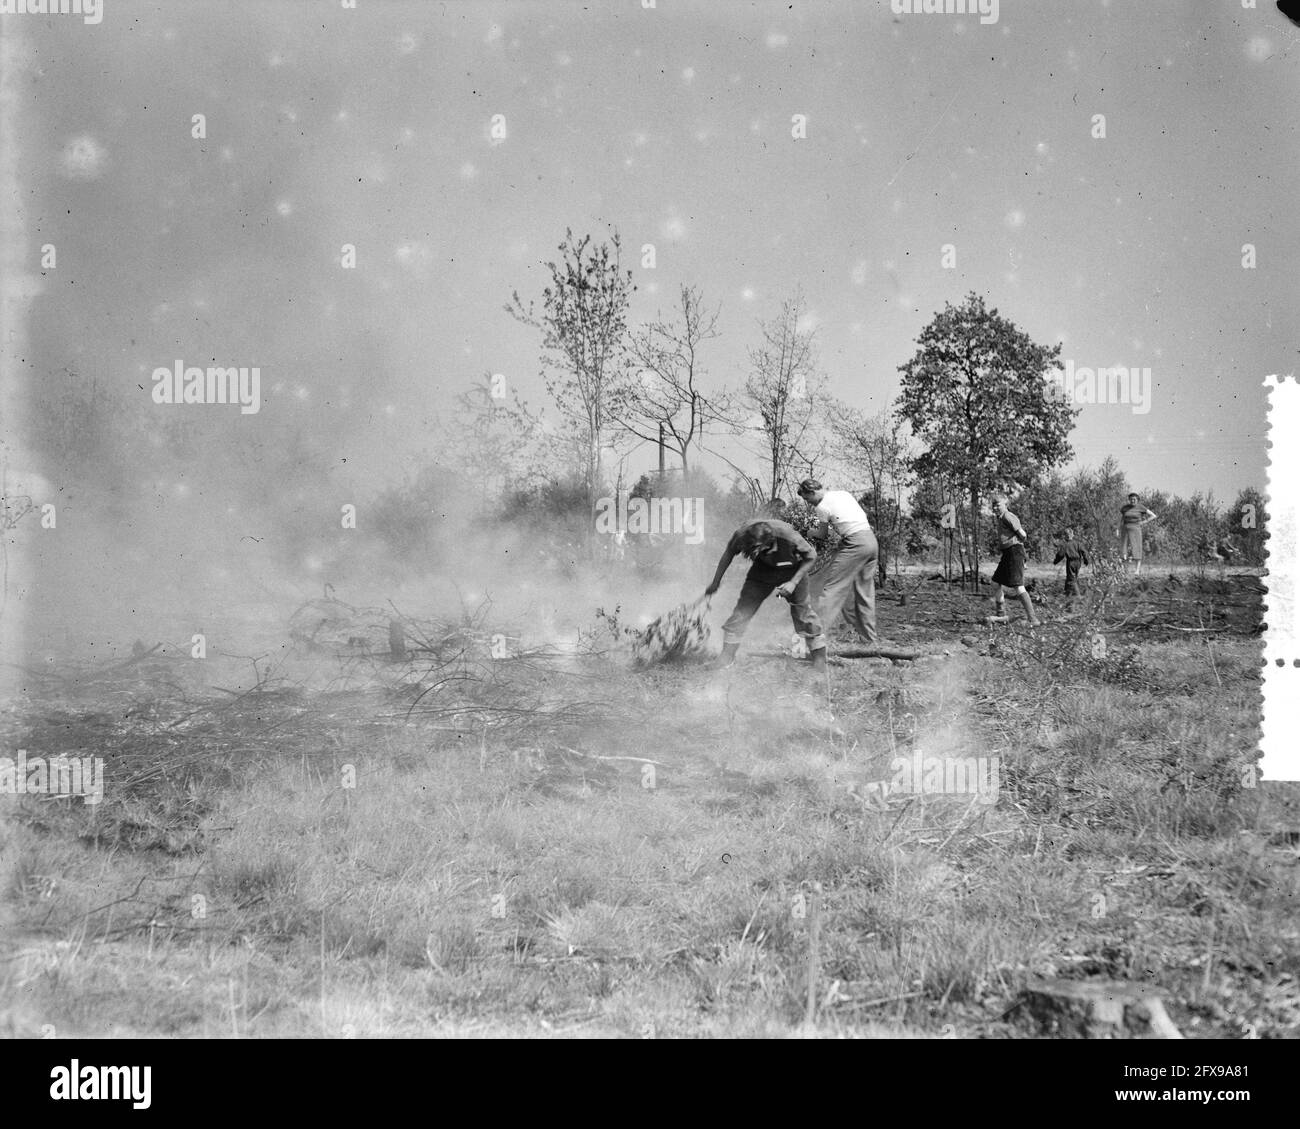 Forest fire and heathland fire near Scherpenzeel, May 22, 1956, Forest fires, The Netherlands, 20th century press agency photo, news to remember, documentary, historic photography 1945-1990, visual stories, human history of the Twentieth Century, capturing moments in time Stock Photo